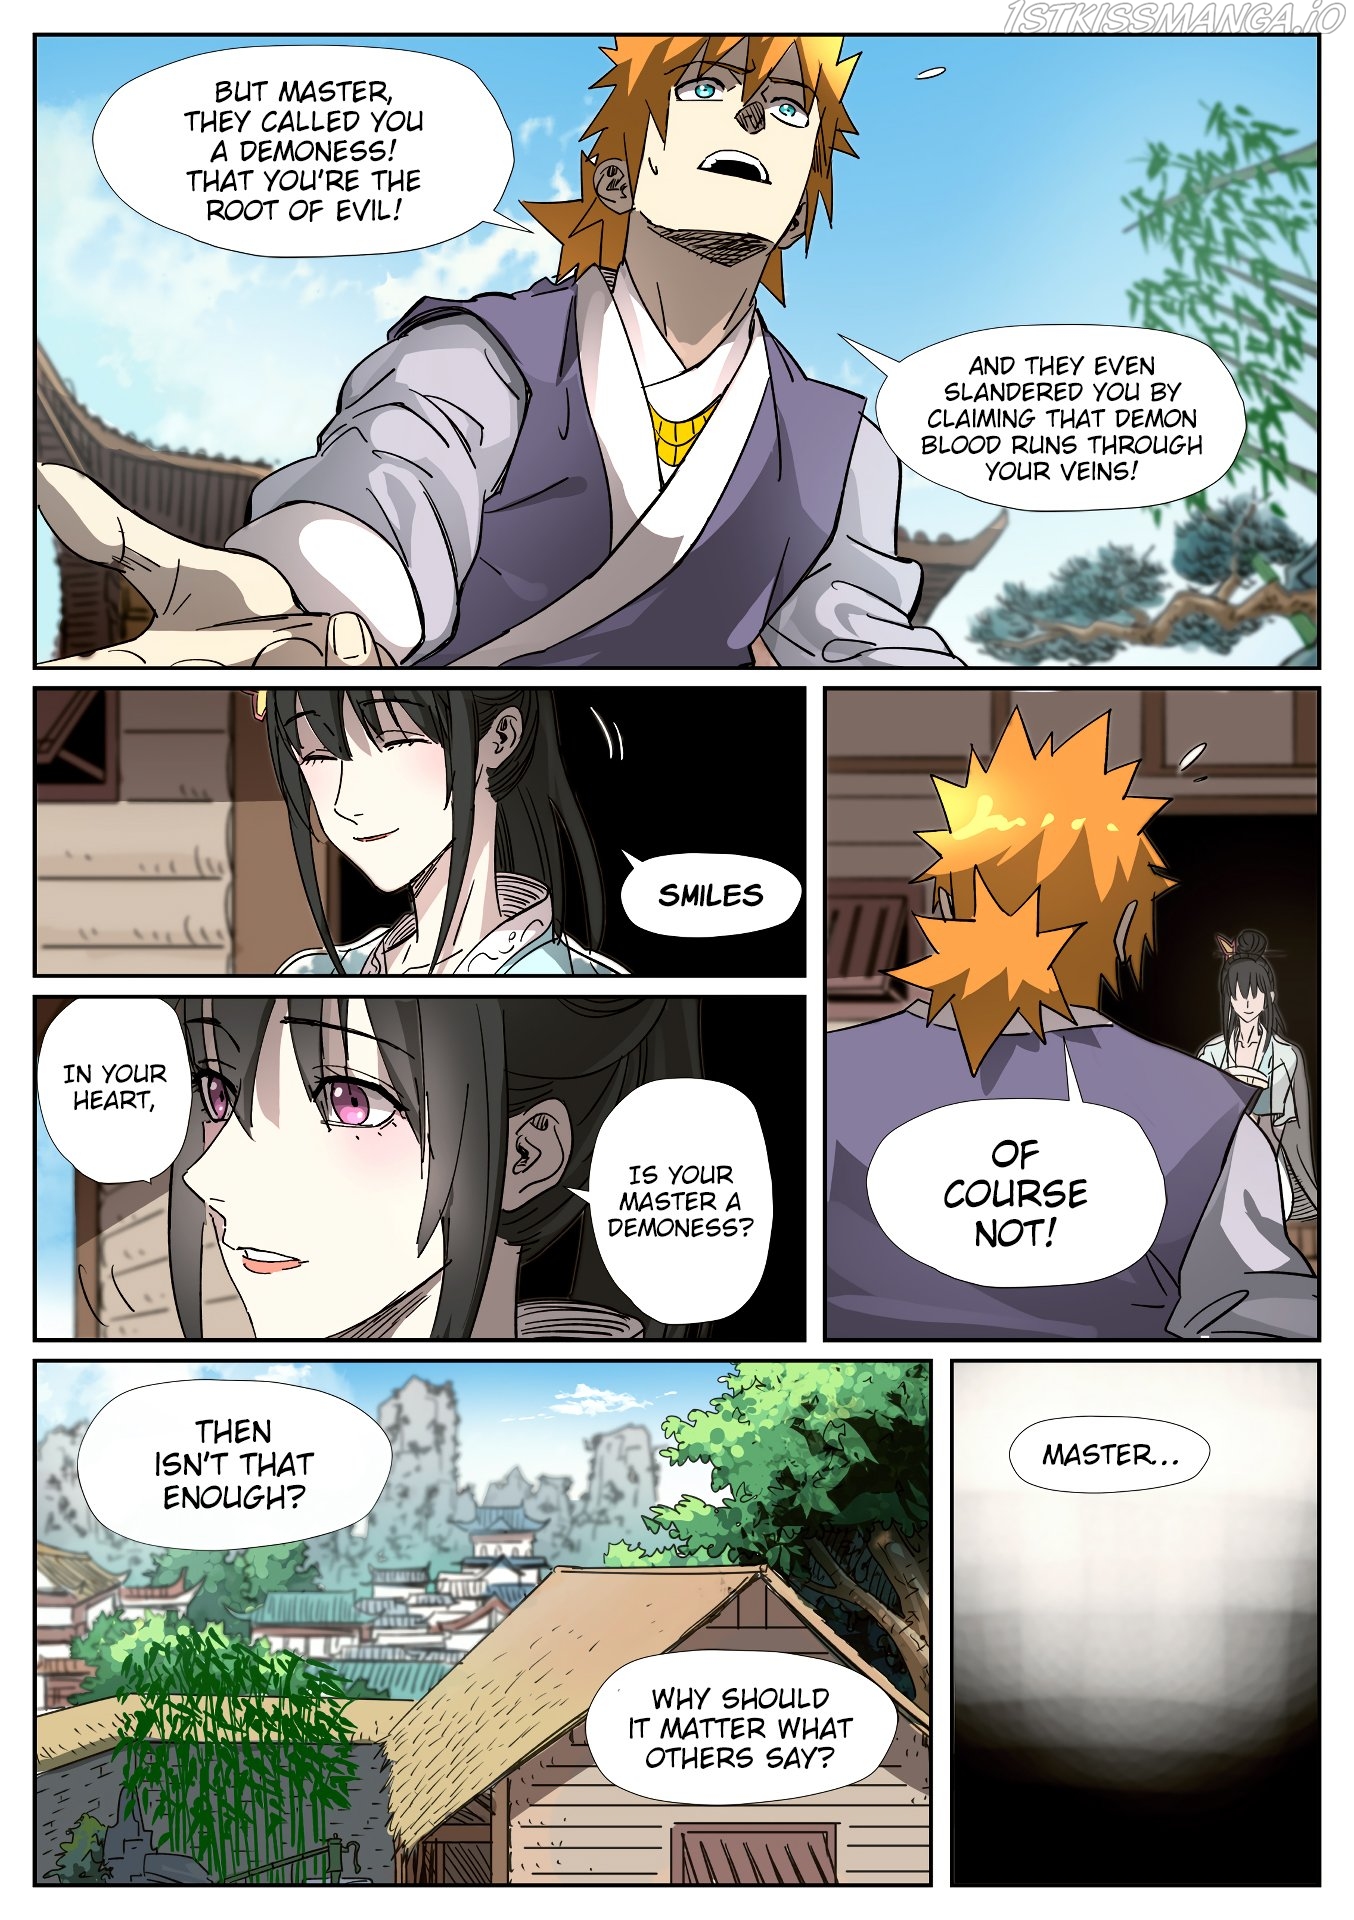 Tales of Demons and Gods Manhua Chapter 311.5 - Page 3